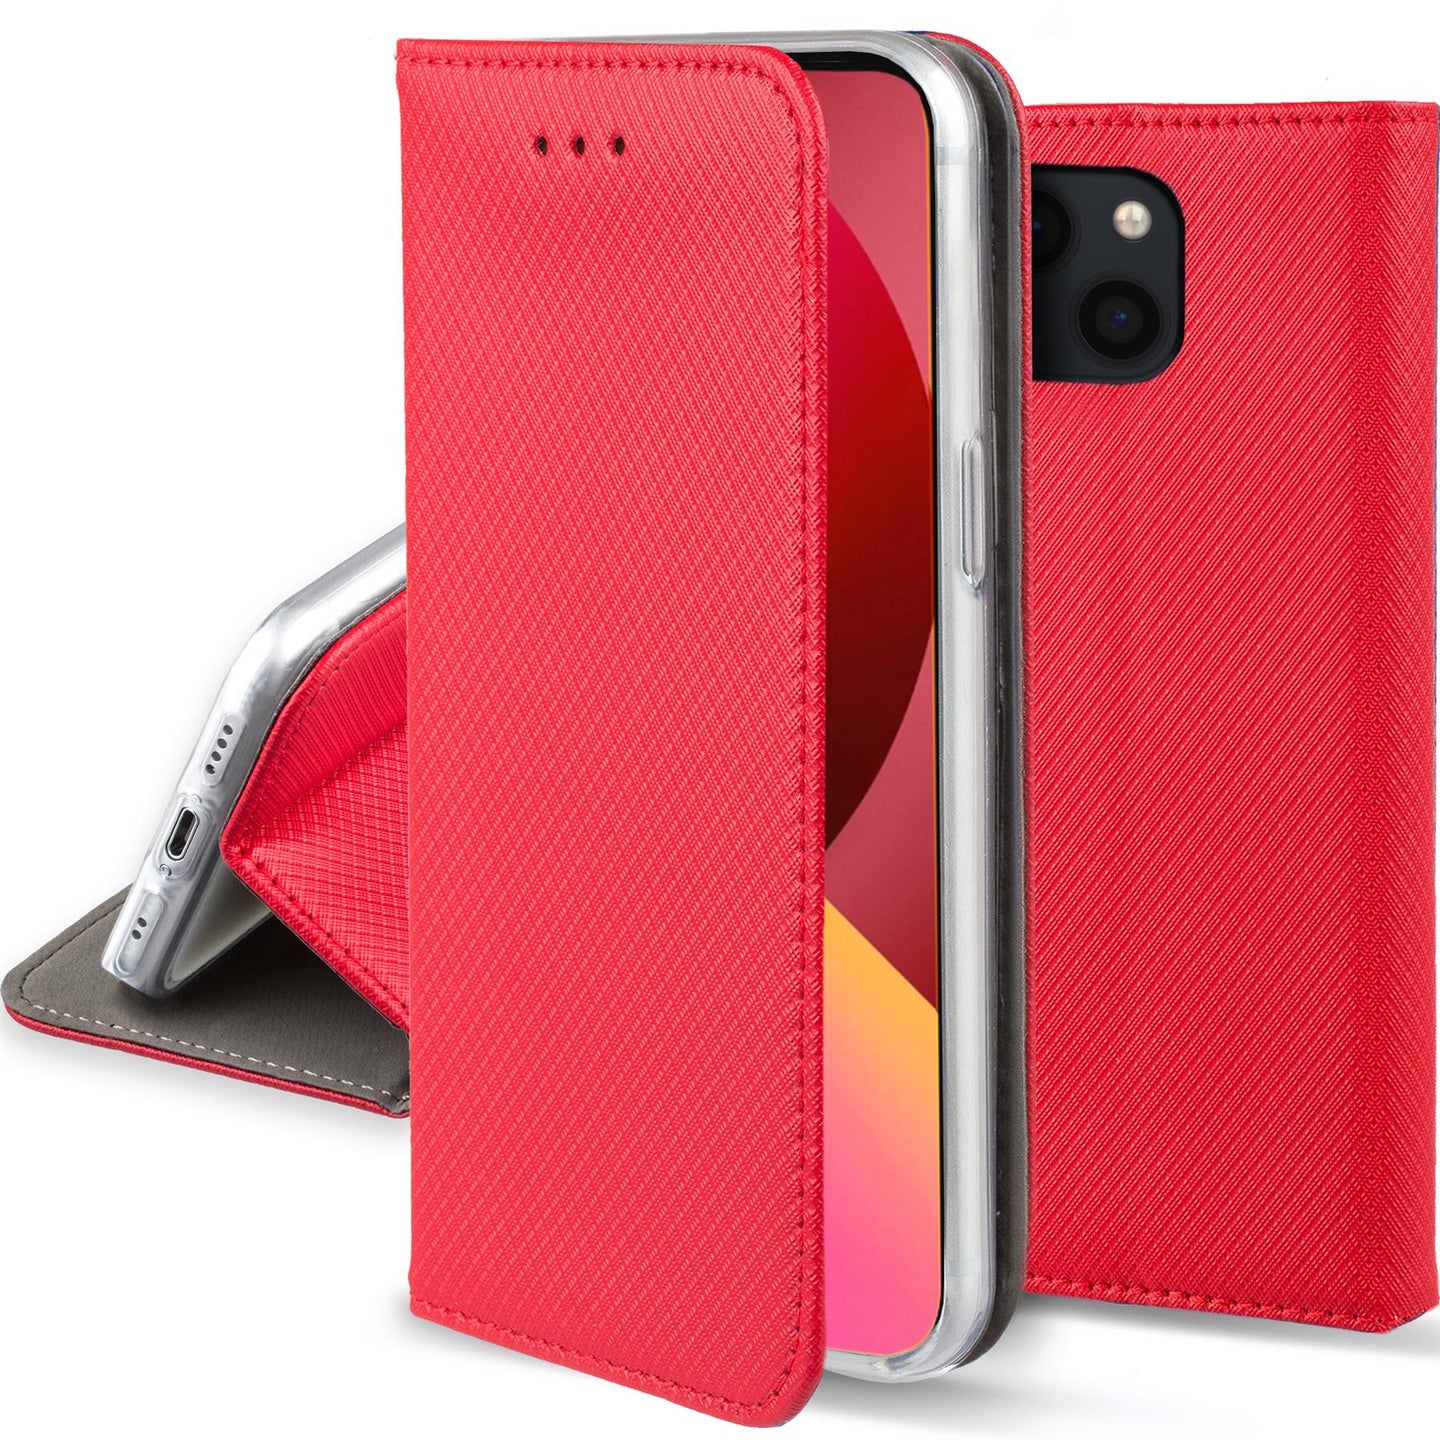 Moozy Case Flip Cover for iPhone 13 Mini, Red - Smart Magnetic Flip Case Flip Folio Wallet Case with Card Holder and Stand, Credit Card Slots10,99